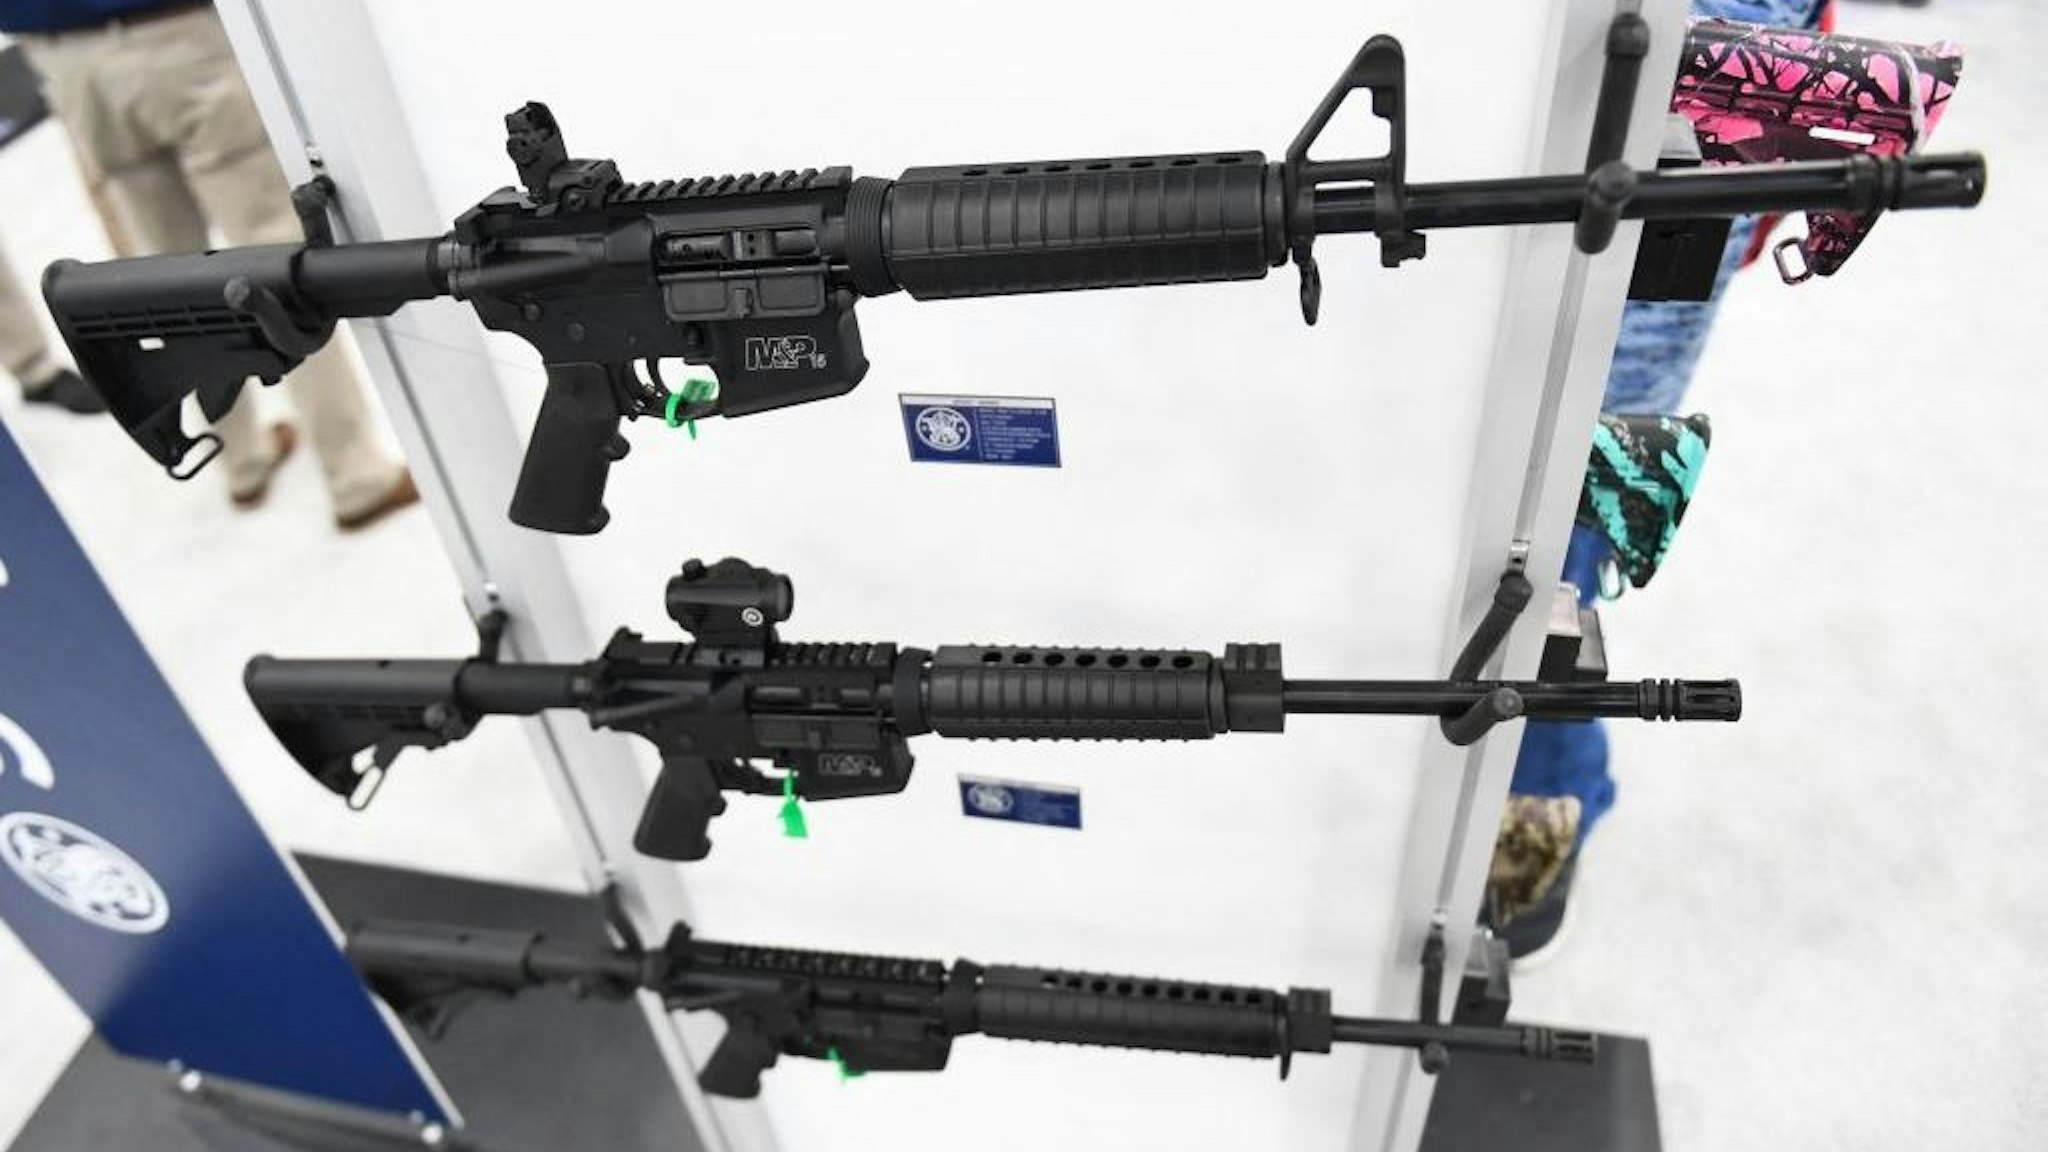 Smith & Wesson M&P-15 semi-automatic rifles of the AR-15 style are displayed during the National Rifle Association (NRA) annual meeting at the George R. Brown Convention Center, in Houston, Texas on May 28, 2022. (Photo by PATRICK T. FALLON/AFP via Getty Images)